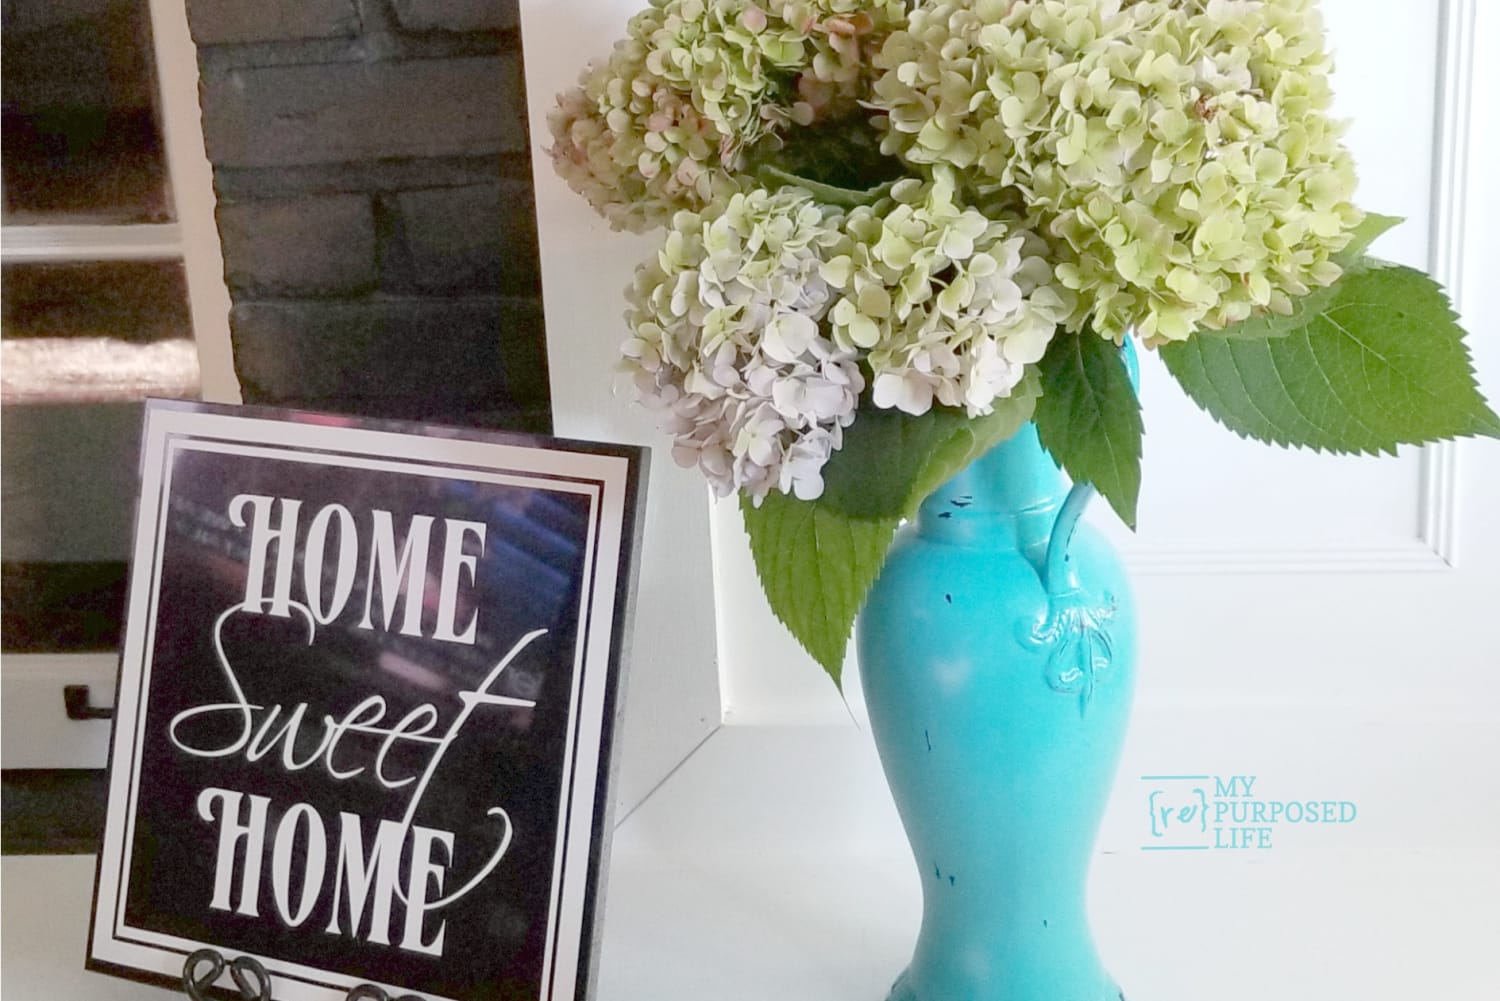 Over sized thrift store vase gets a much needed makeover!